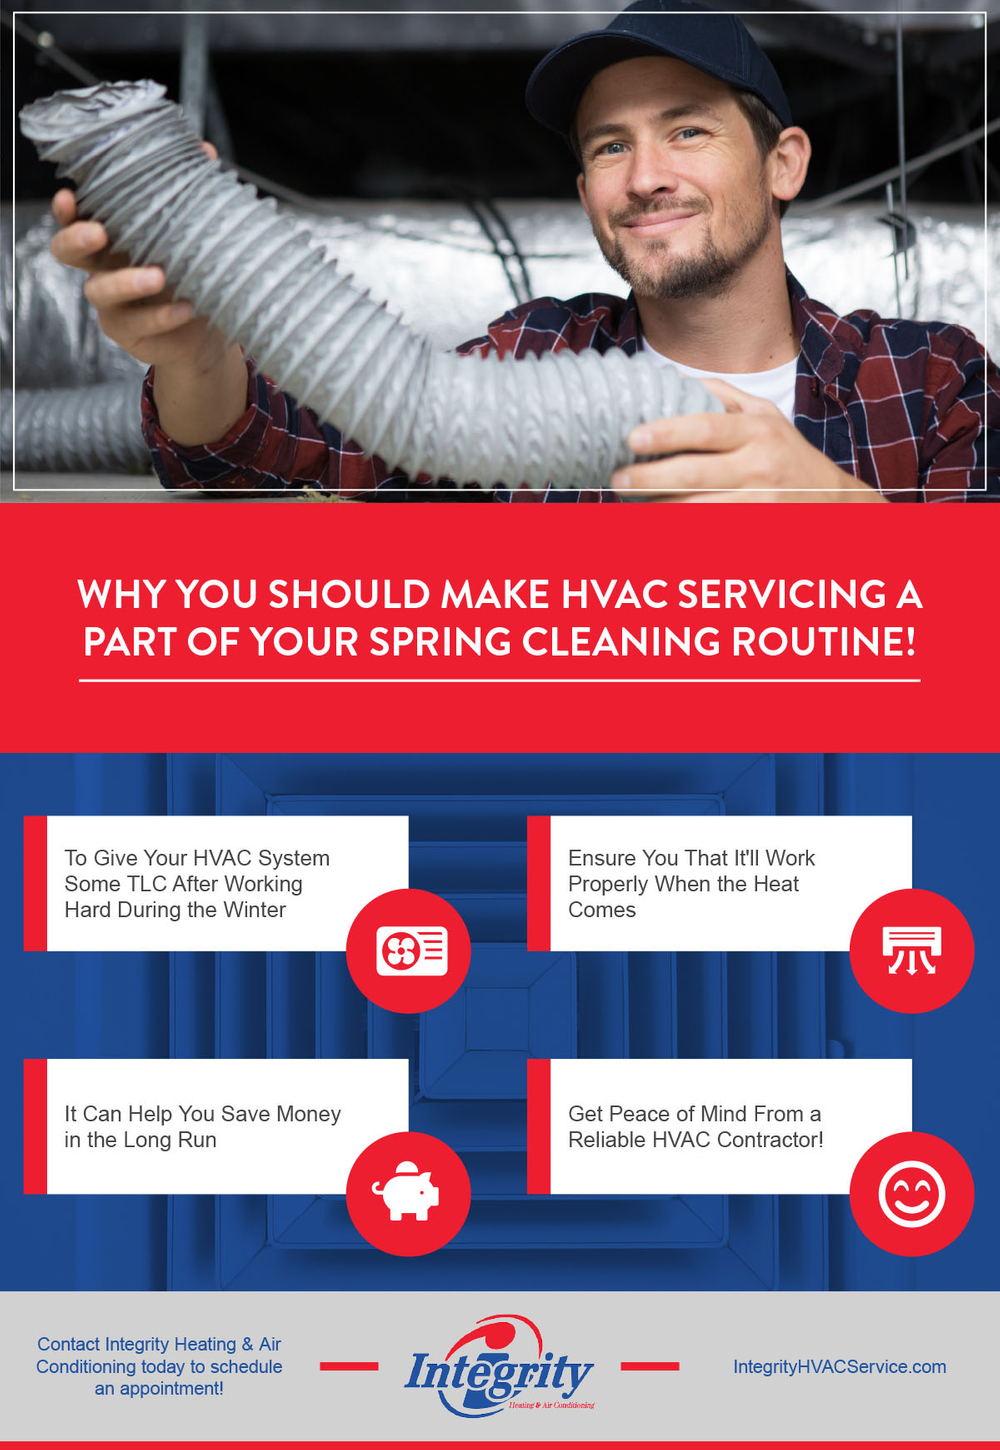 Why HVAC Services Should Be a Part of Your Spring Cleaning Routine Infographic.jpg